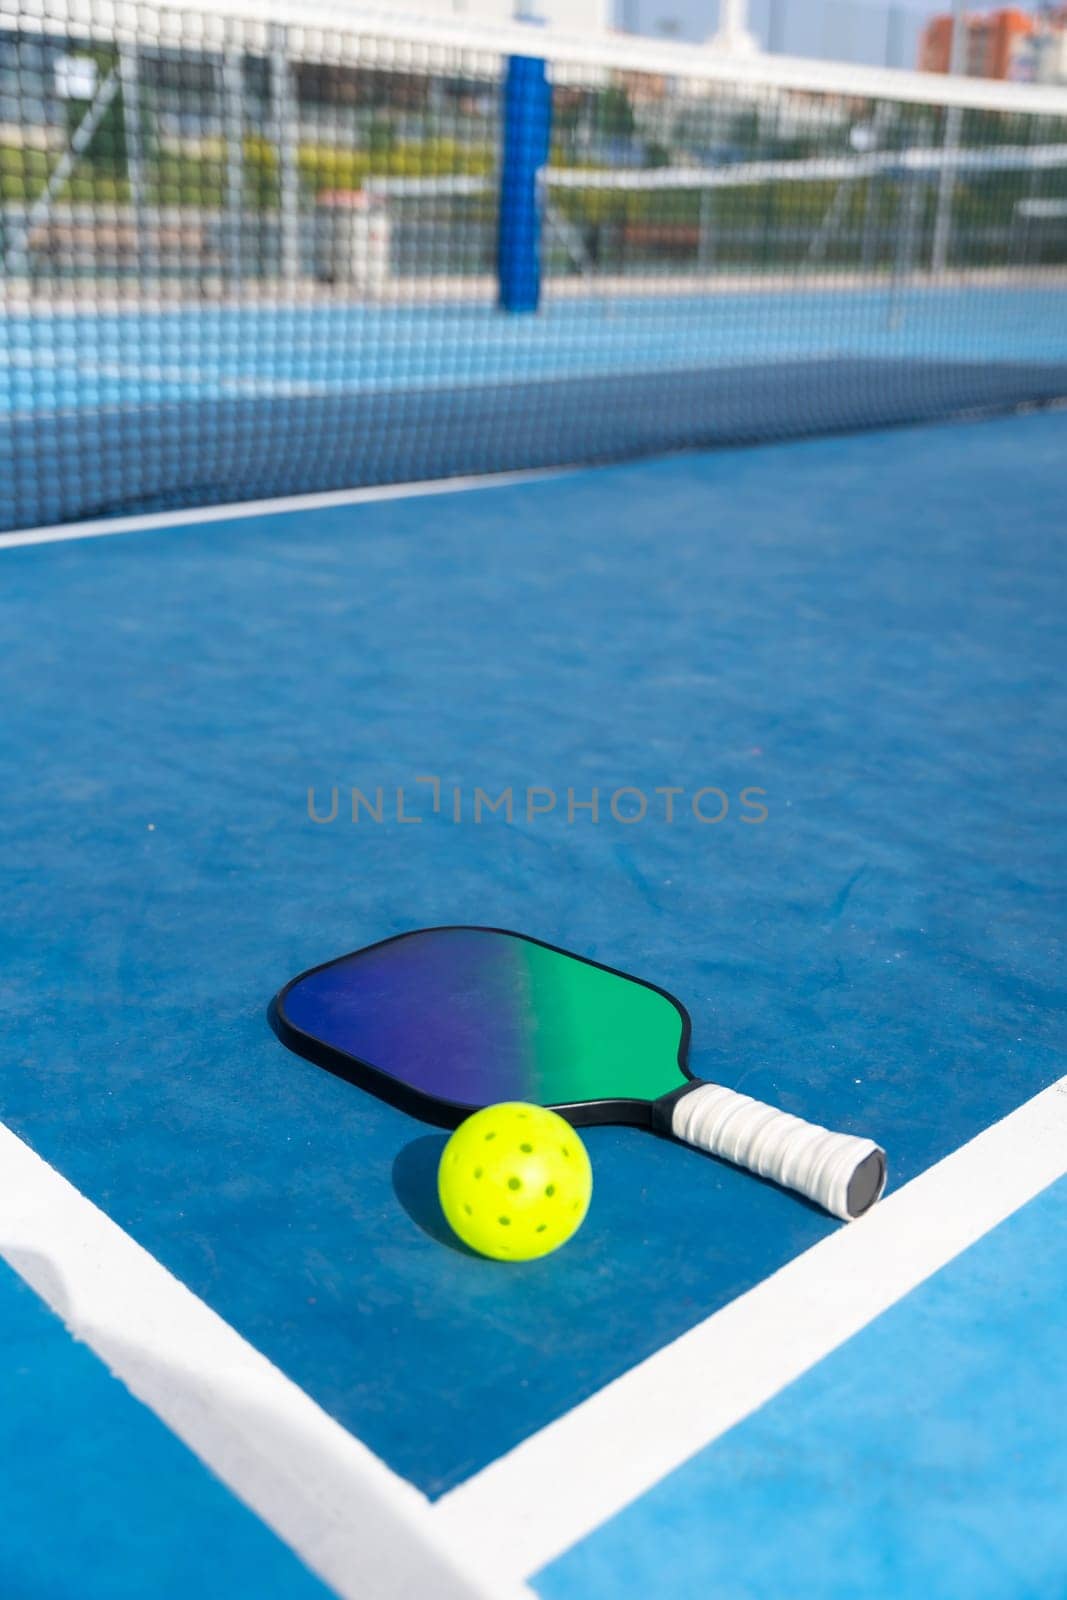 Racket and yellow pickleball ball on a court by Huizi